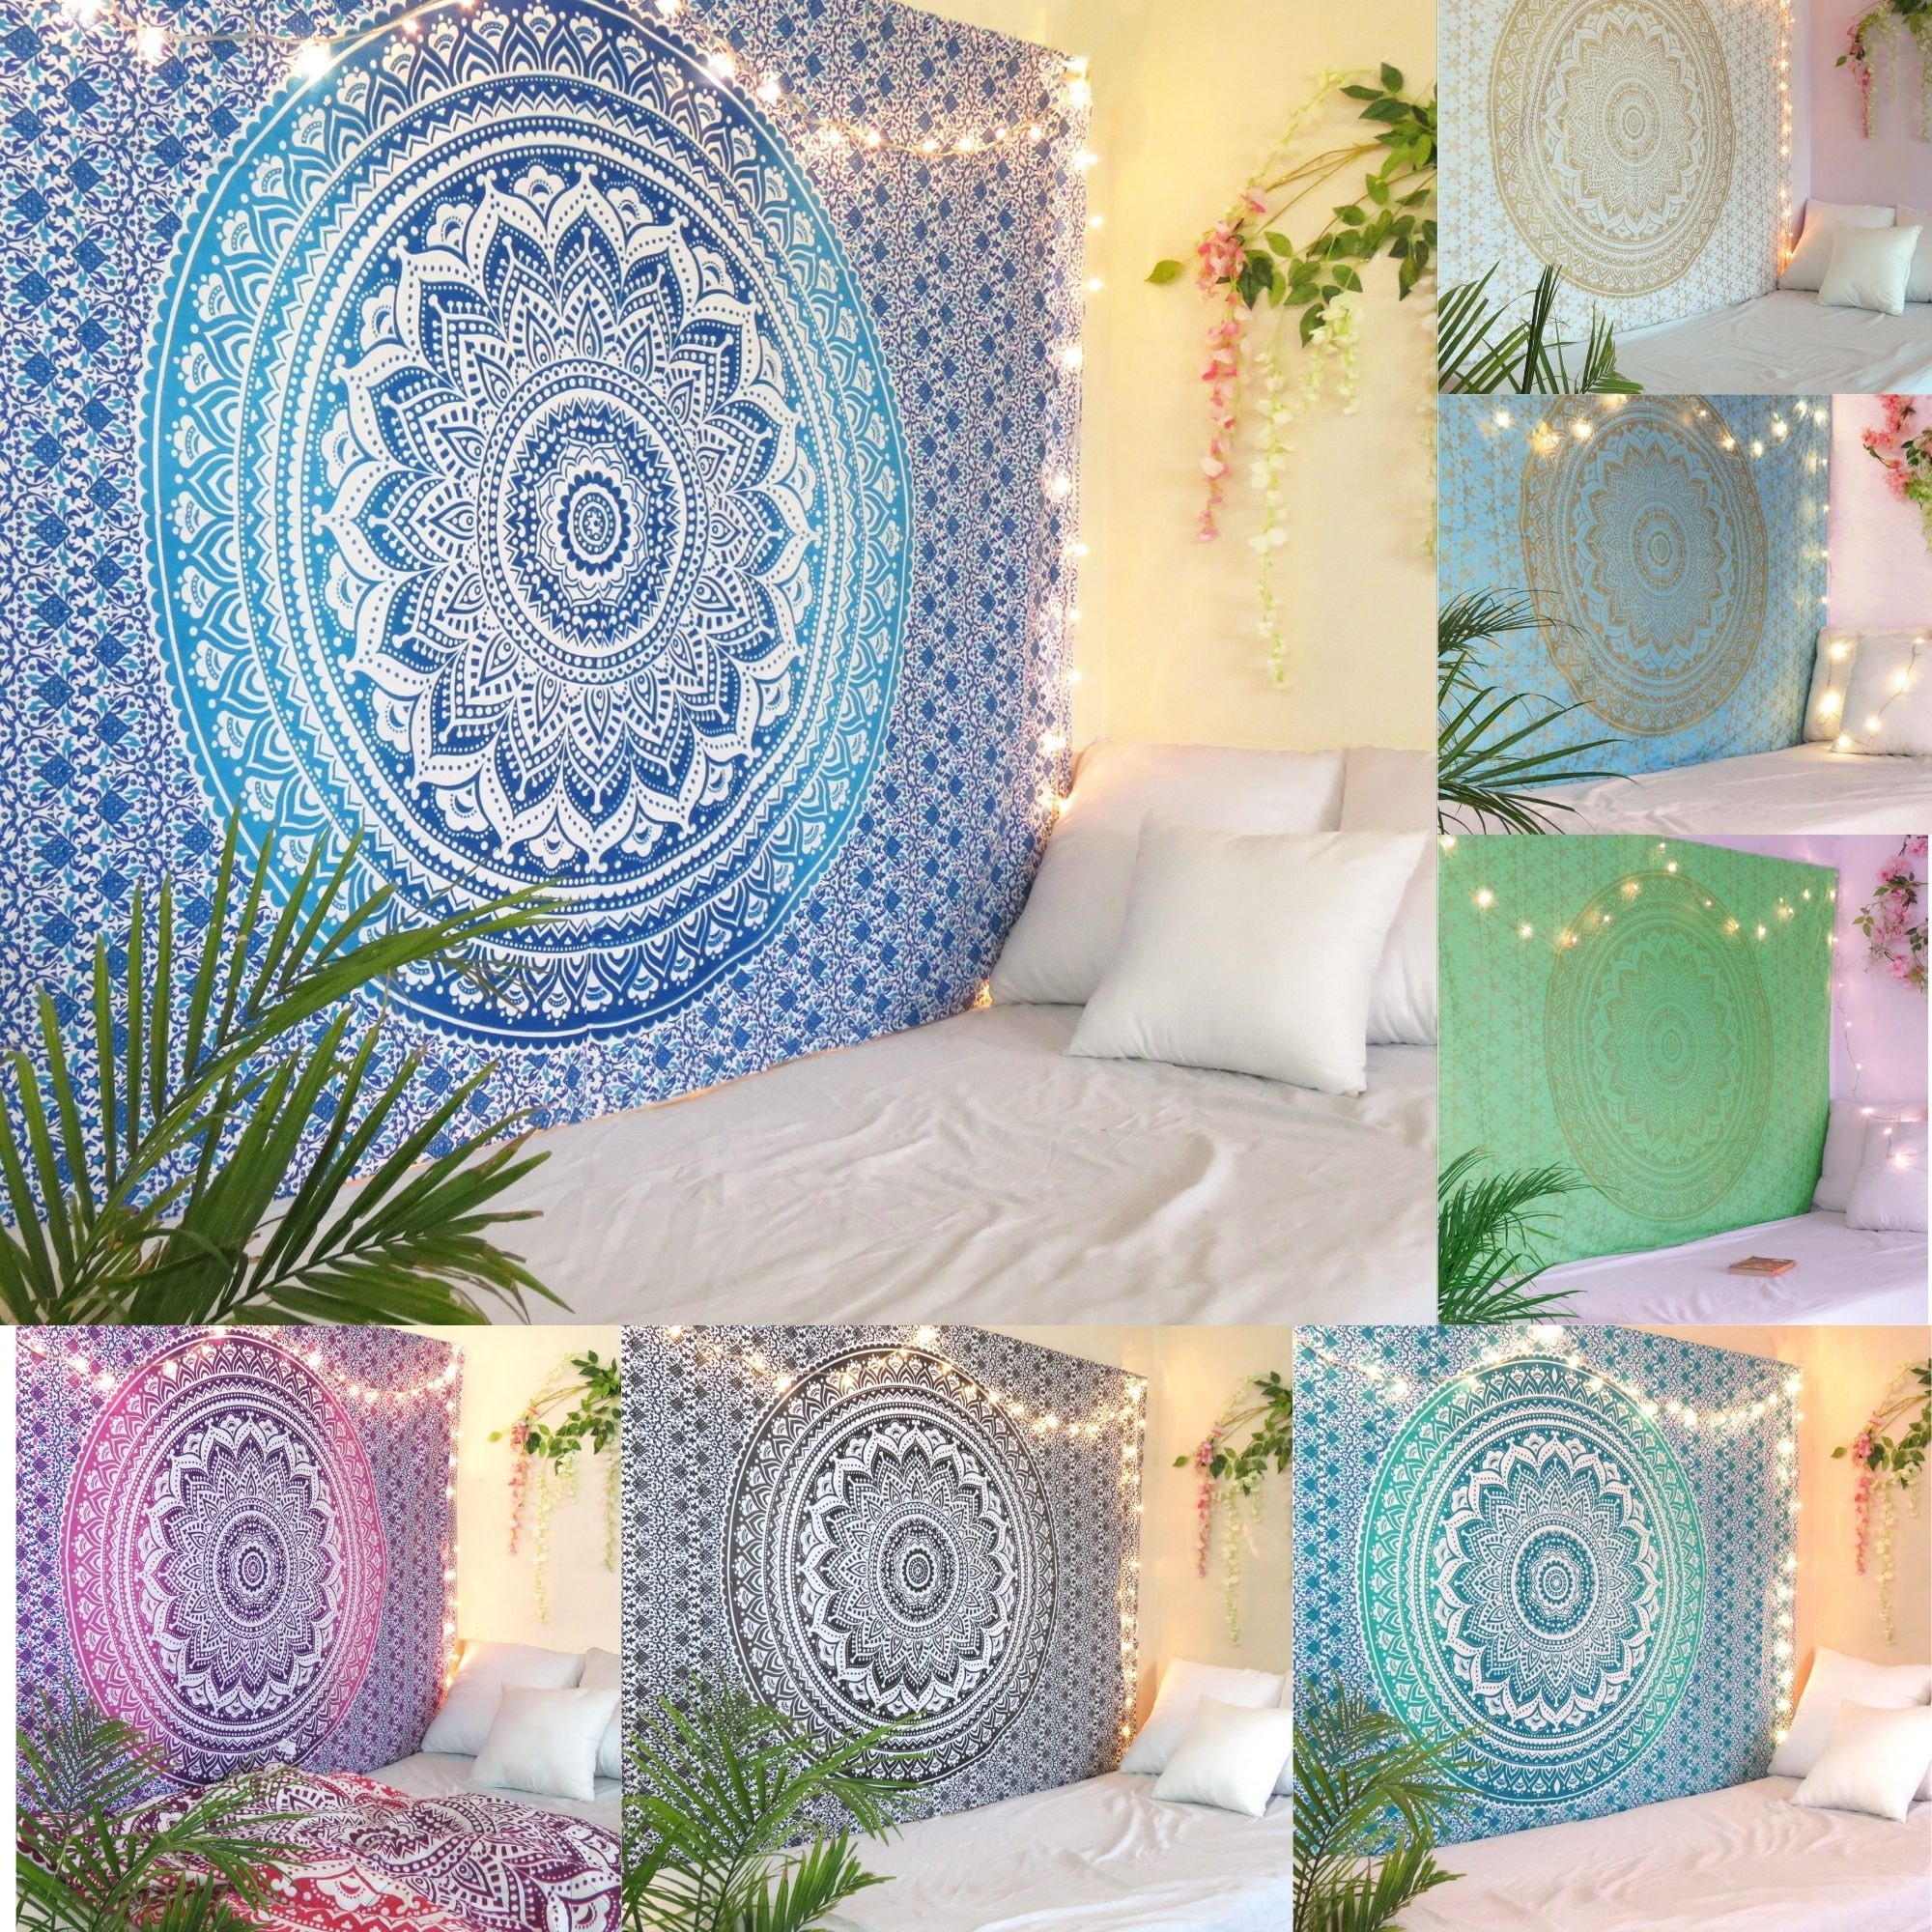 PURPLE Ombre Wall Hanging MandalaTapestry Hippie KING Bedspread Throw Home Decor 